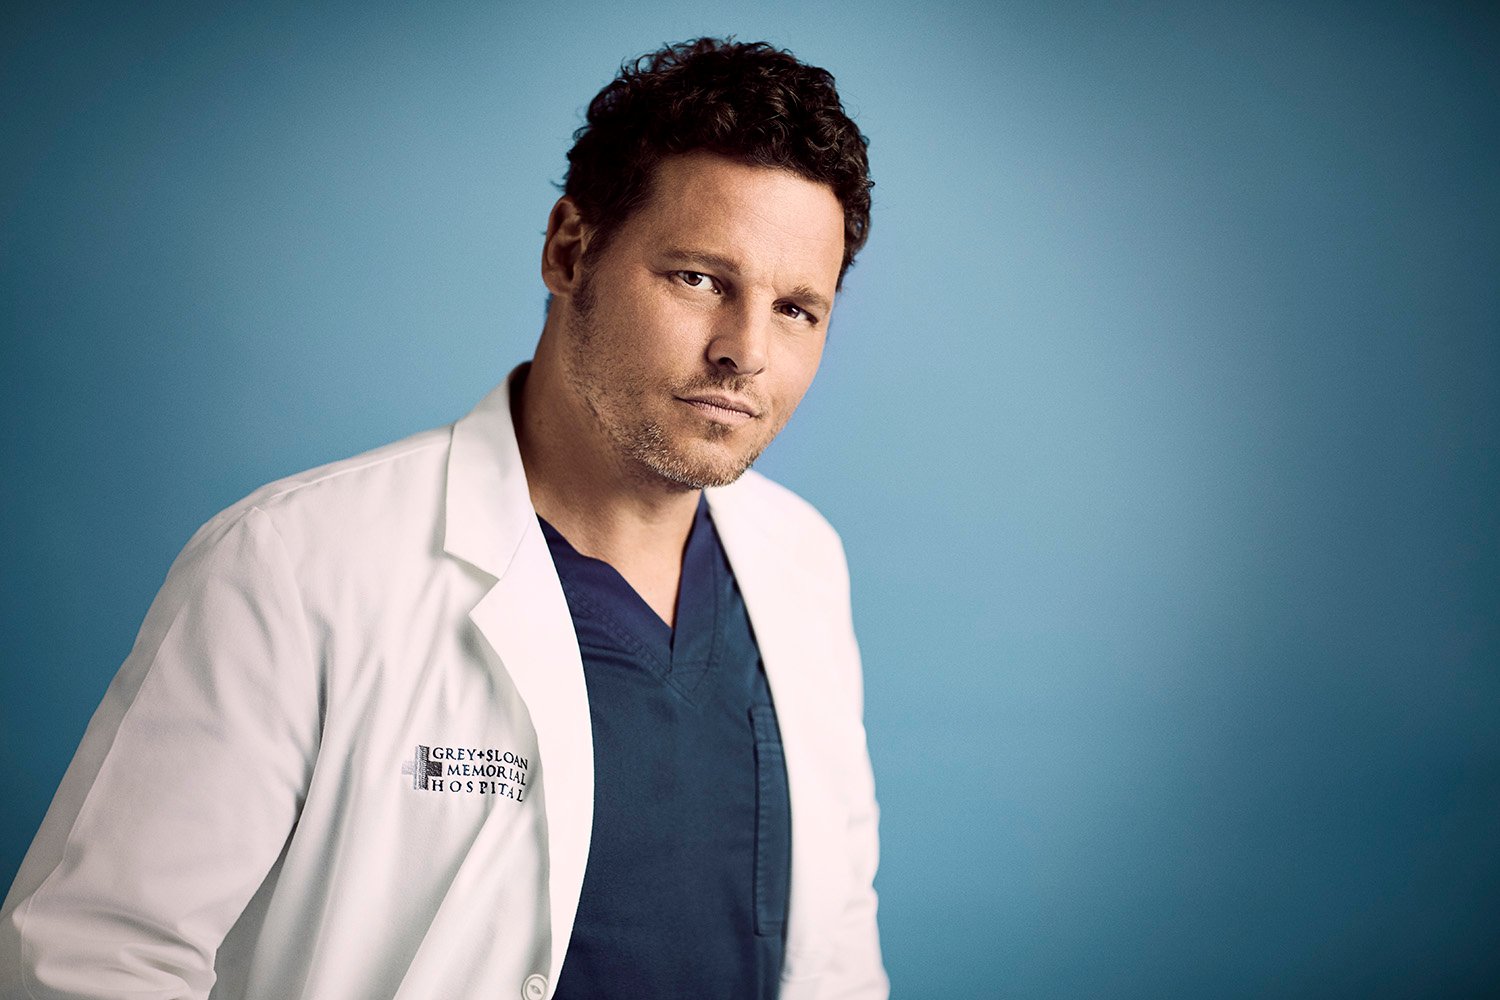 Actor Justin Chambers taking a photo as Alex Karev on 'Grey's Anatomy'